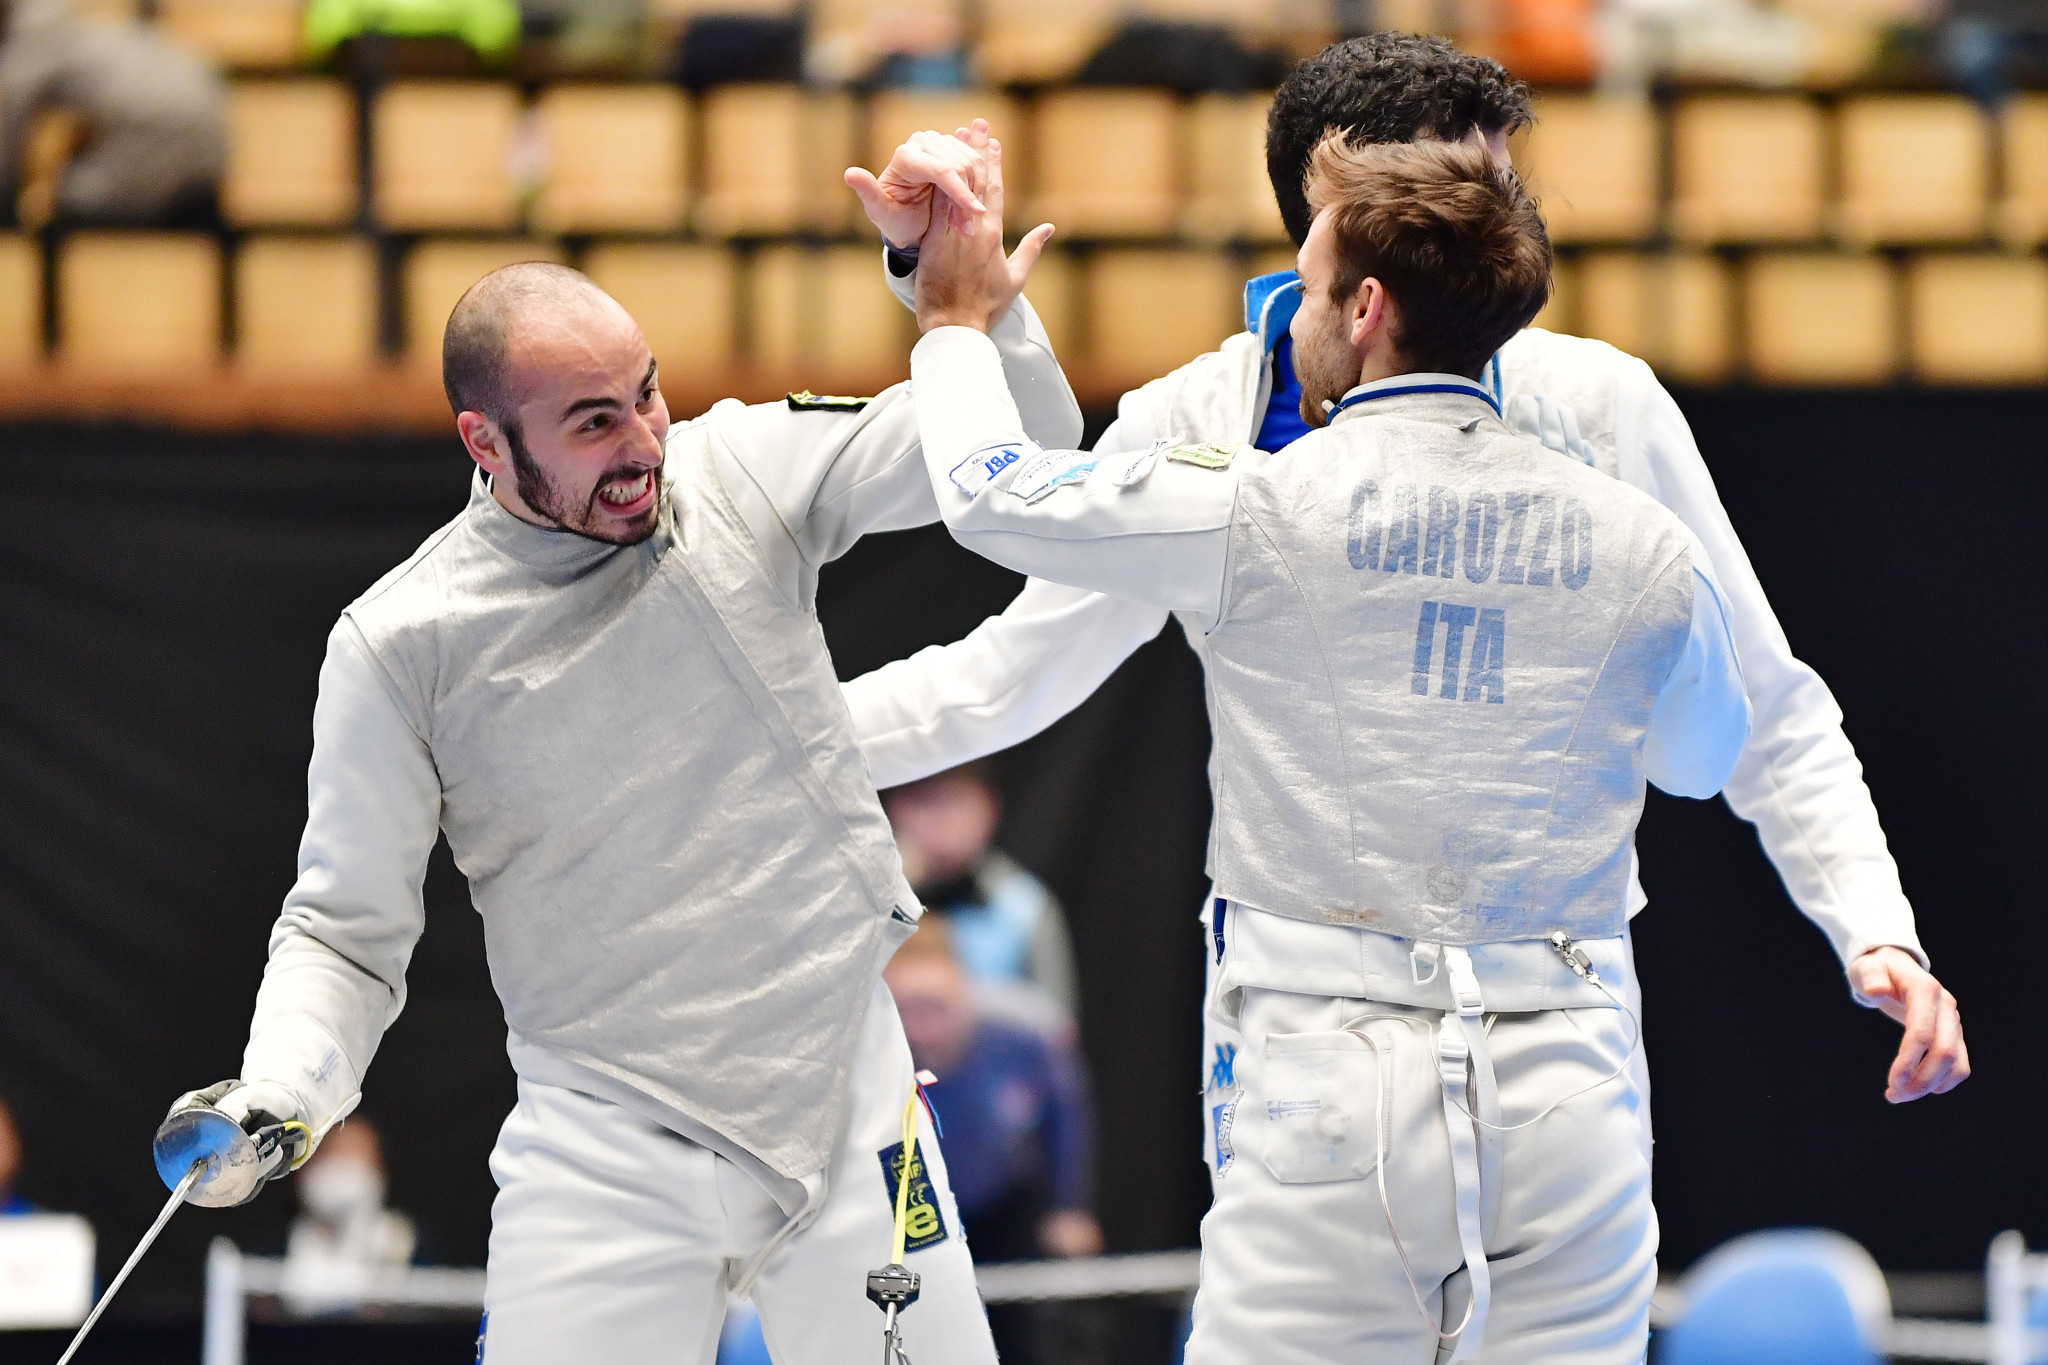 Italy claim men's team title as France win women's at FIE Foil World Cups